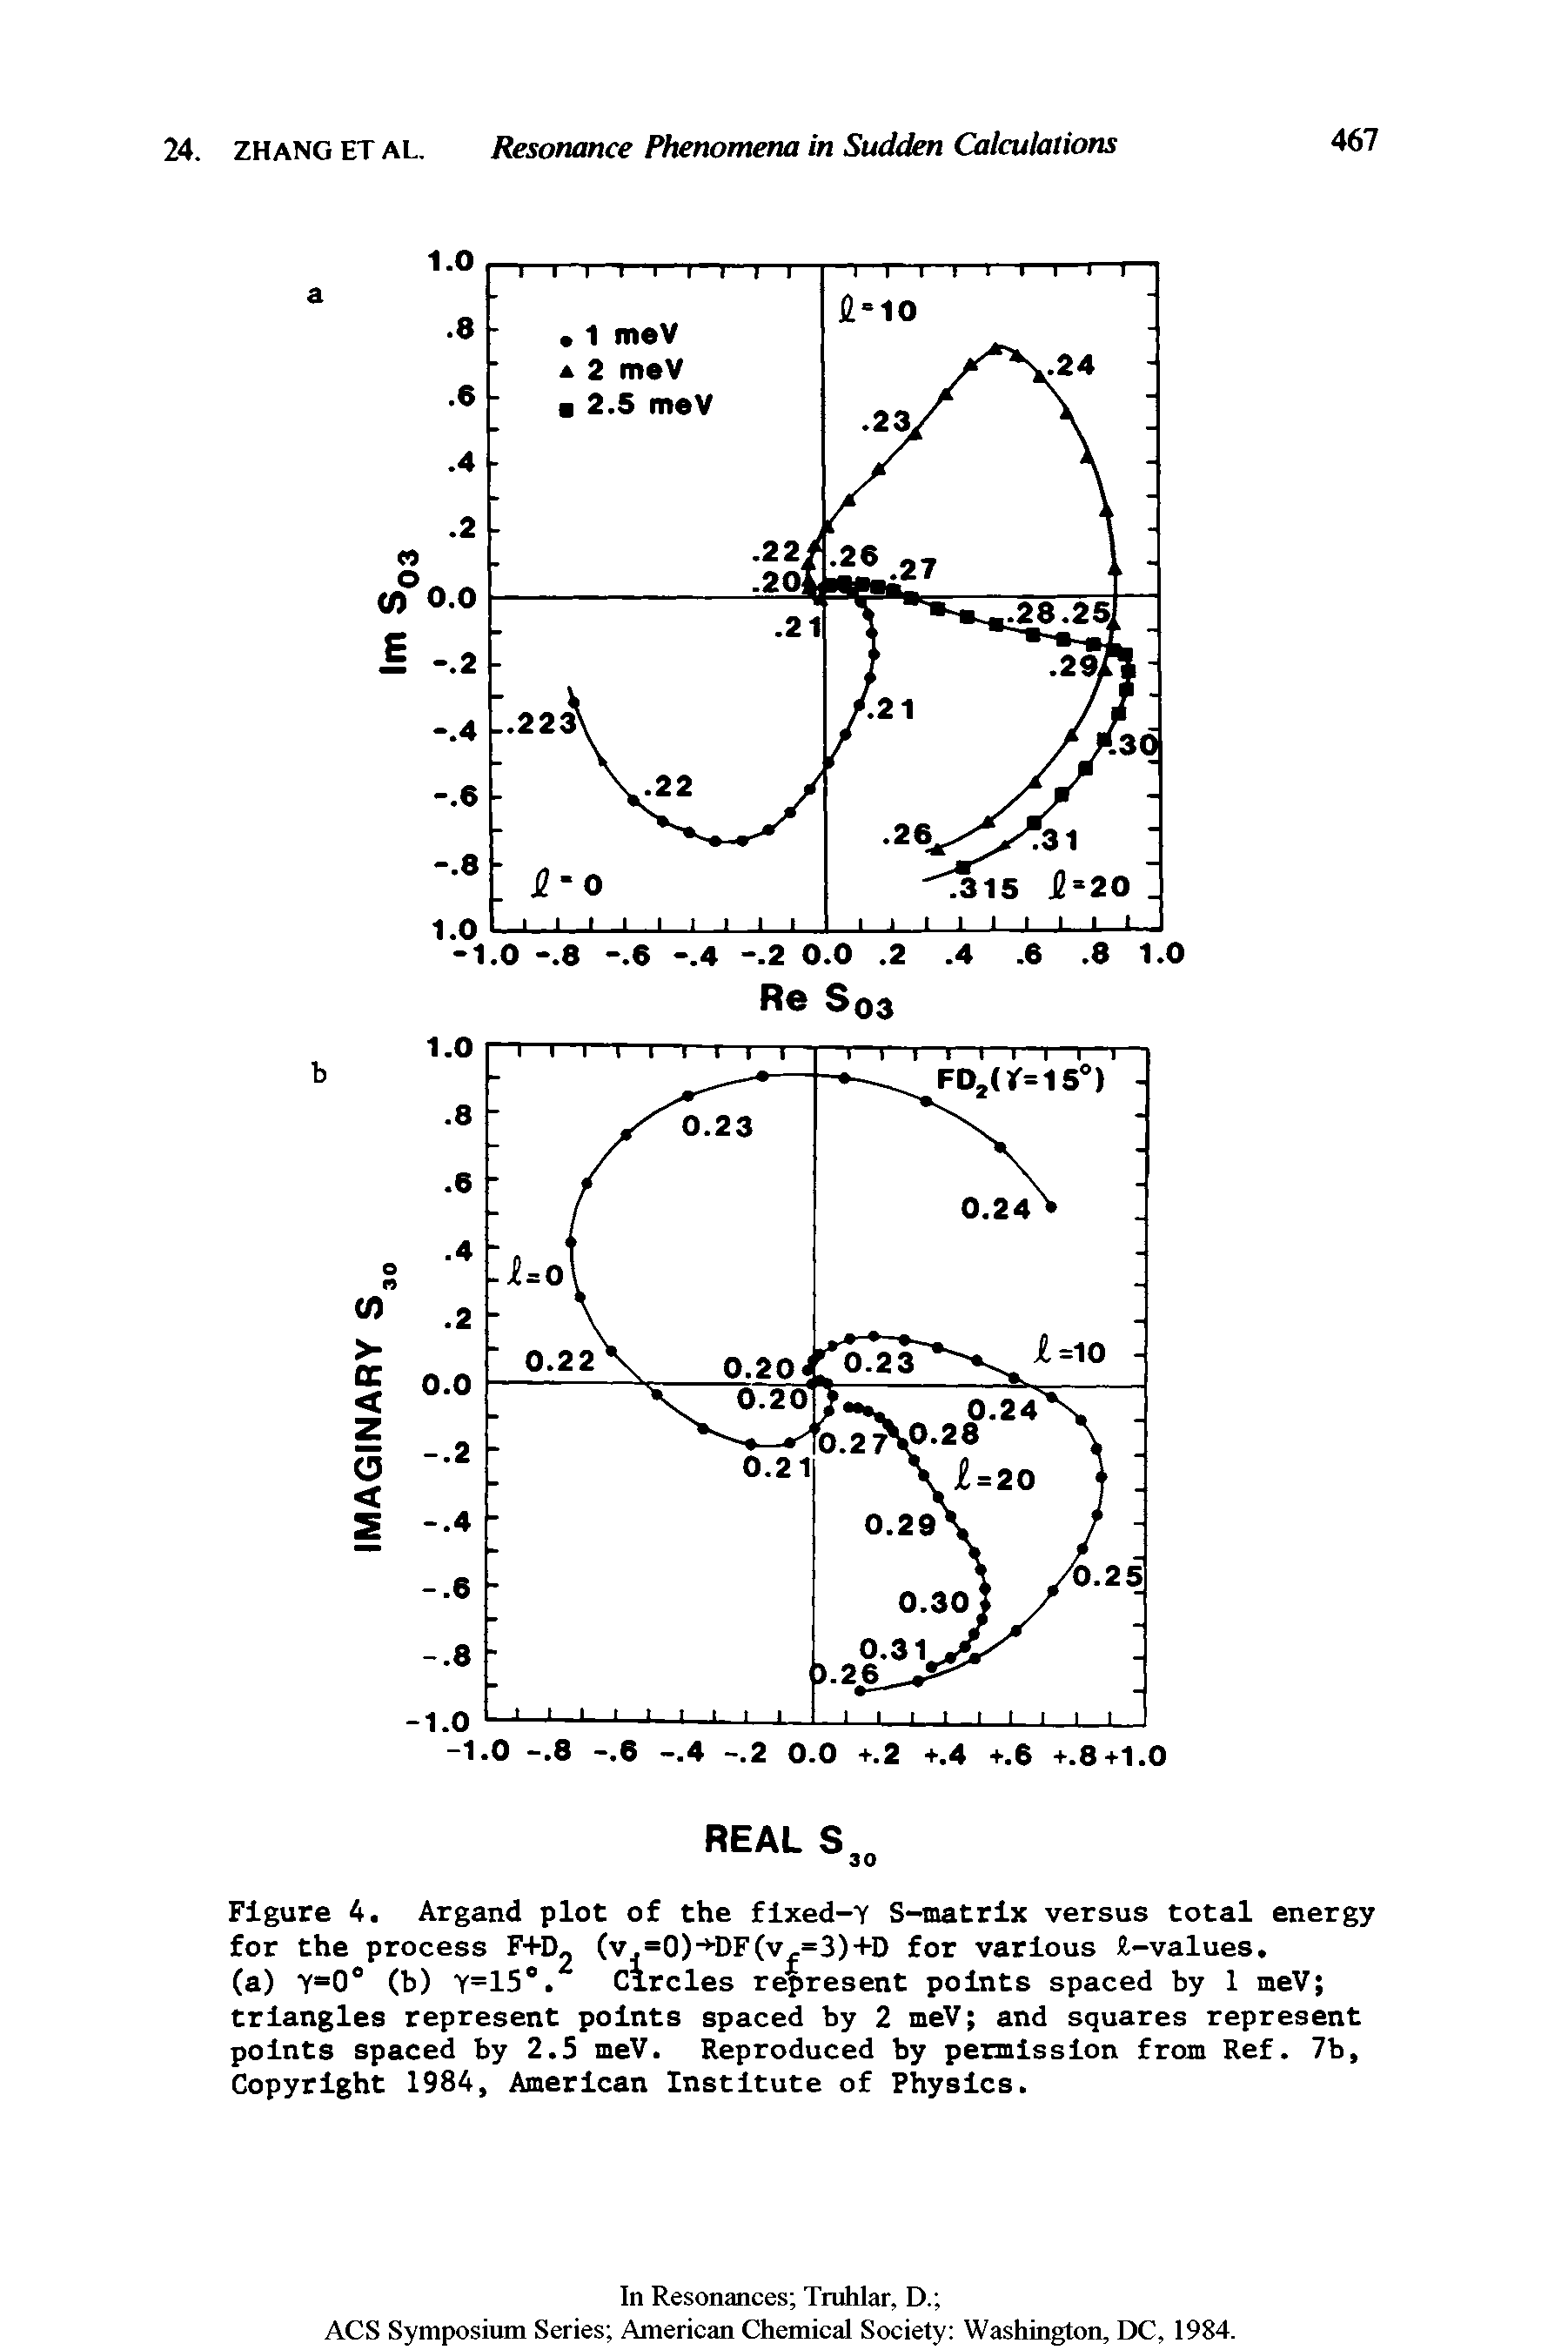 Figure 4. Argand plot of the flxed-V S-matrlx versus total energy for the process F+D- (v. 0)- DF(v,=3)+D for various. -values,...